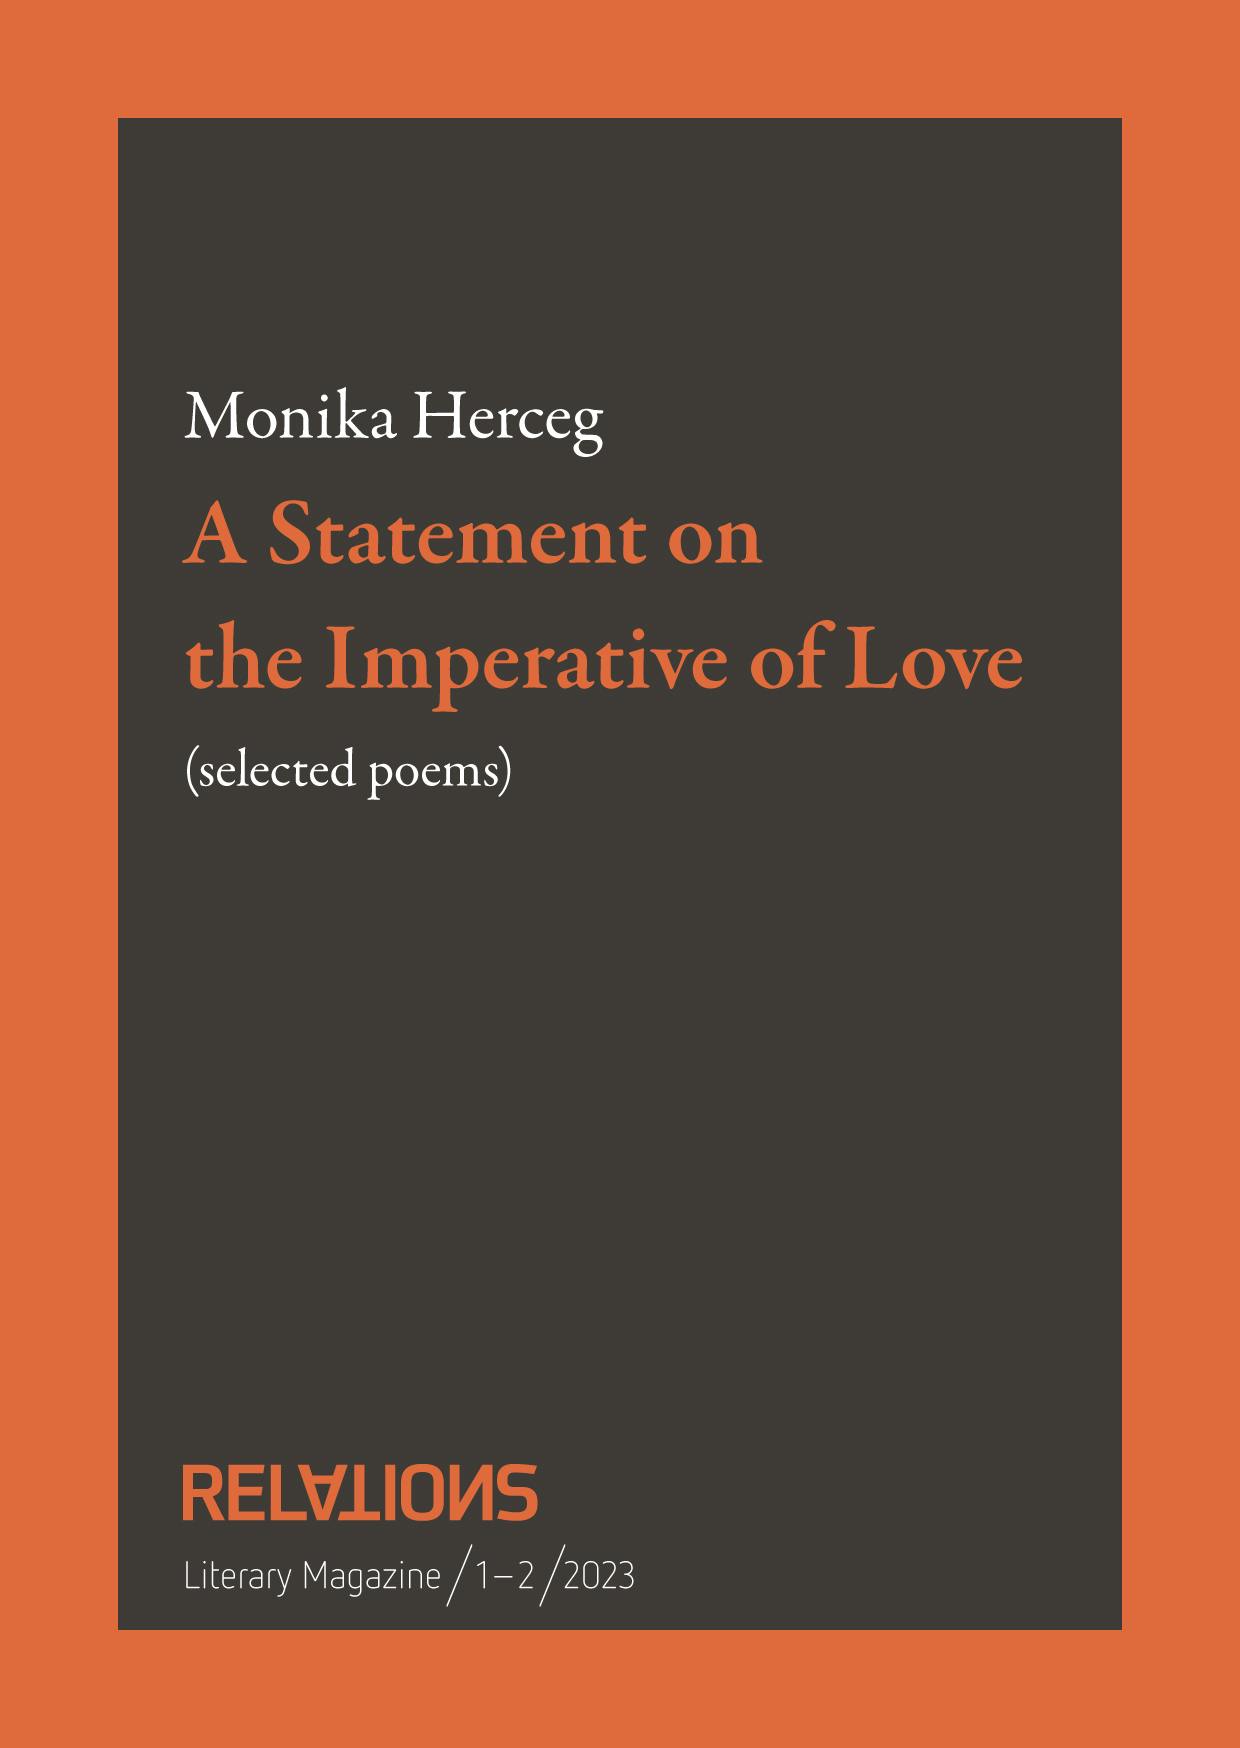 A Statement on the Imperative of Love